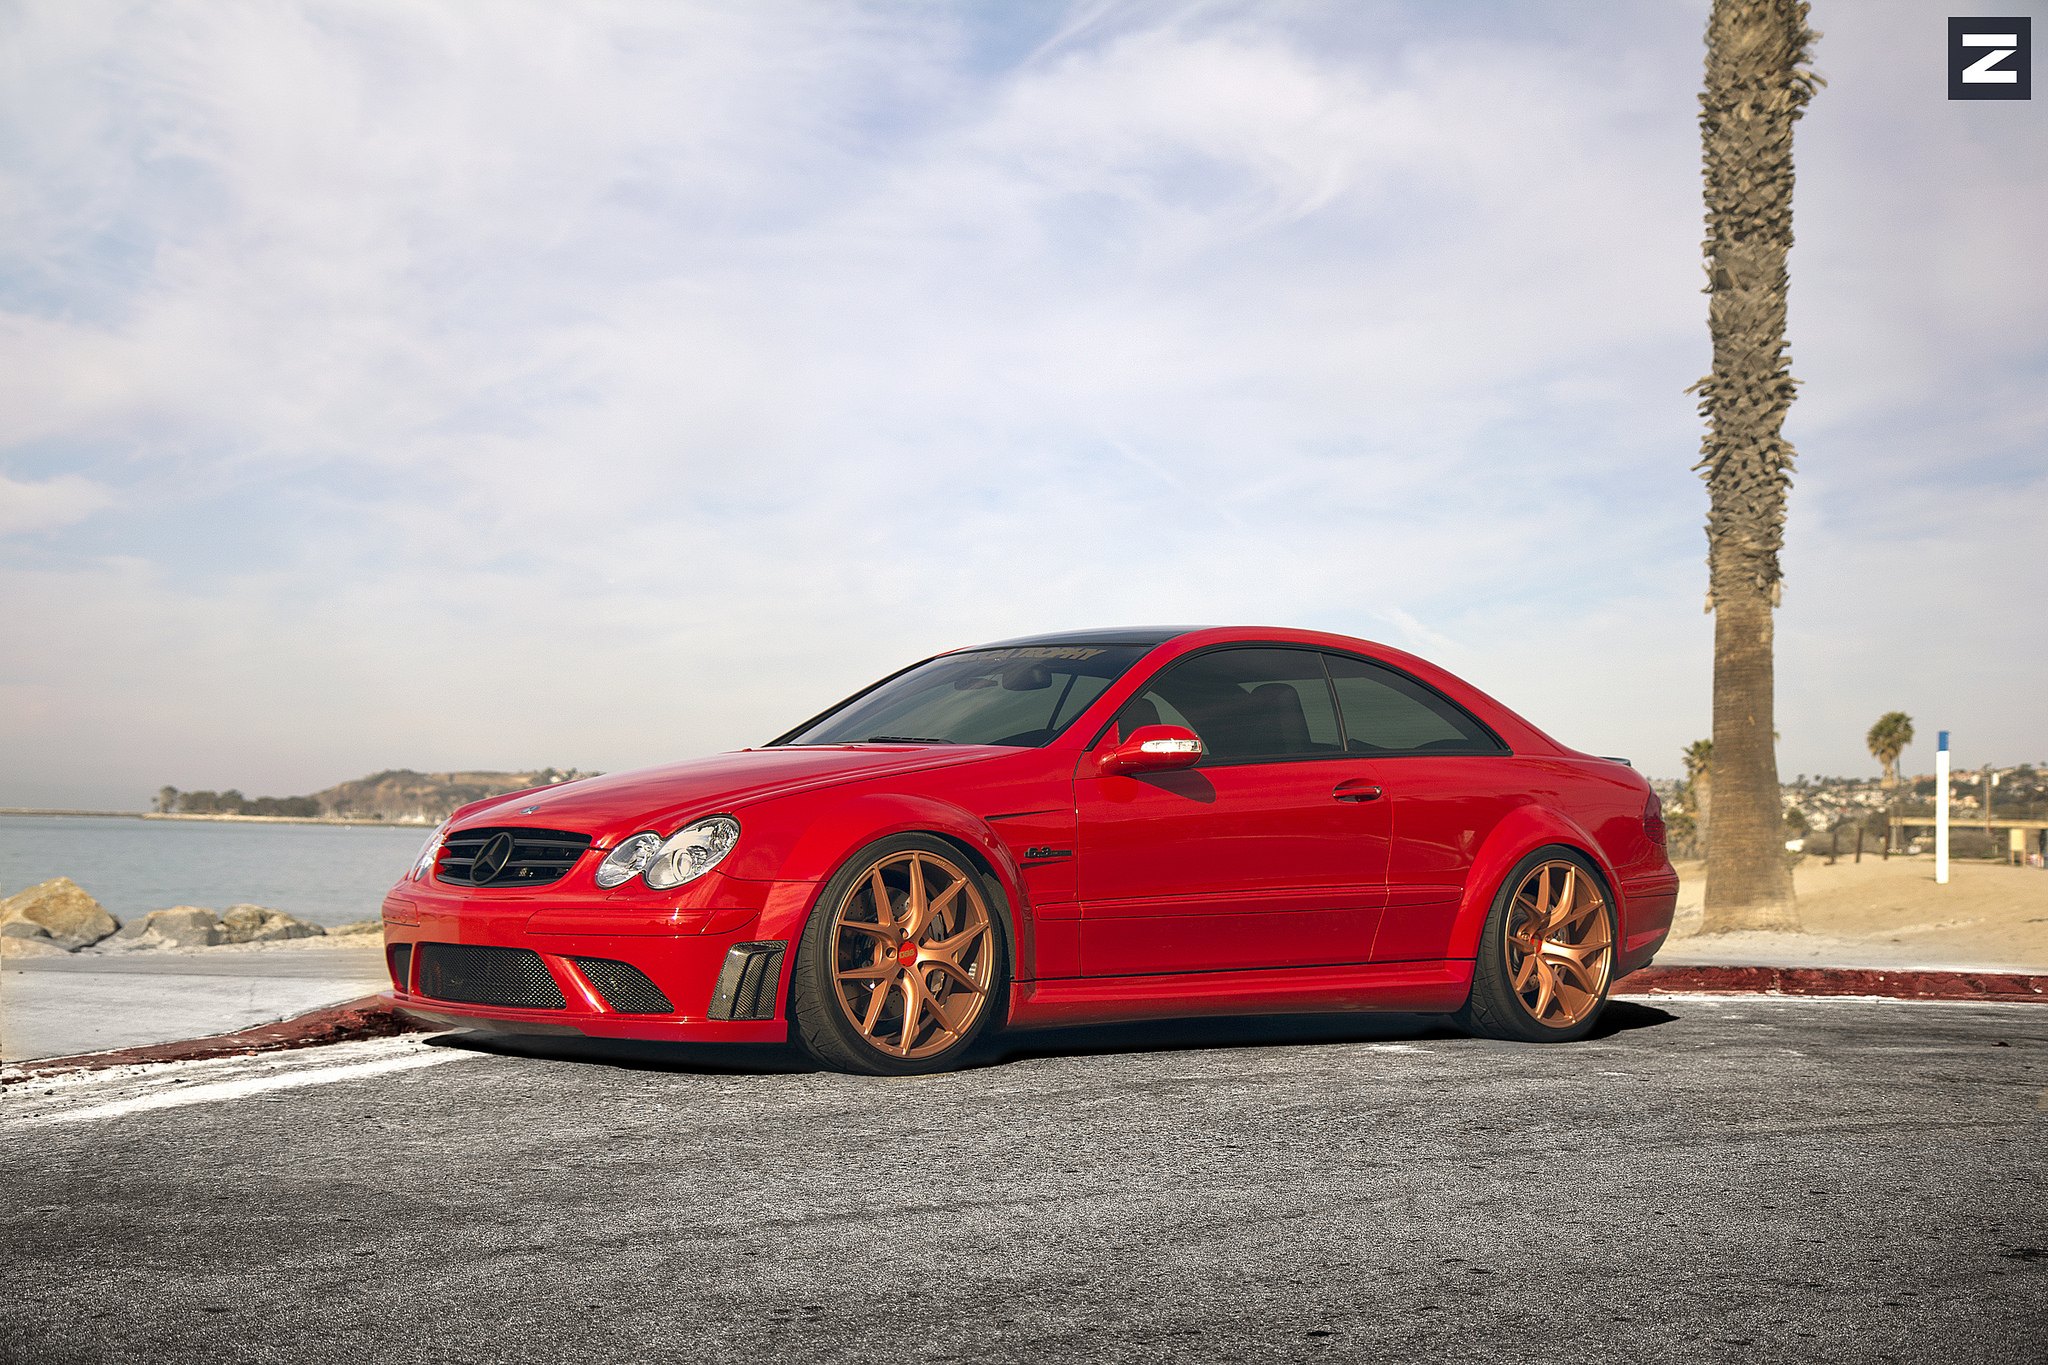 Red Mercedes CLK Class with Matte Bronze Zito Rims - Photo by Zito Wheels